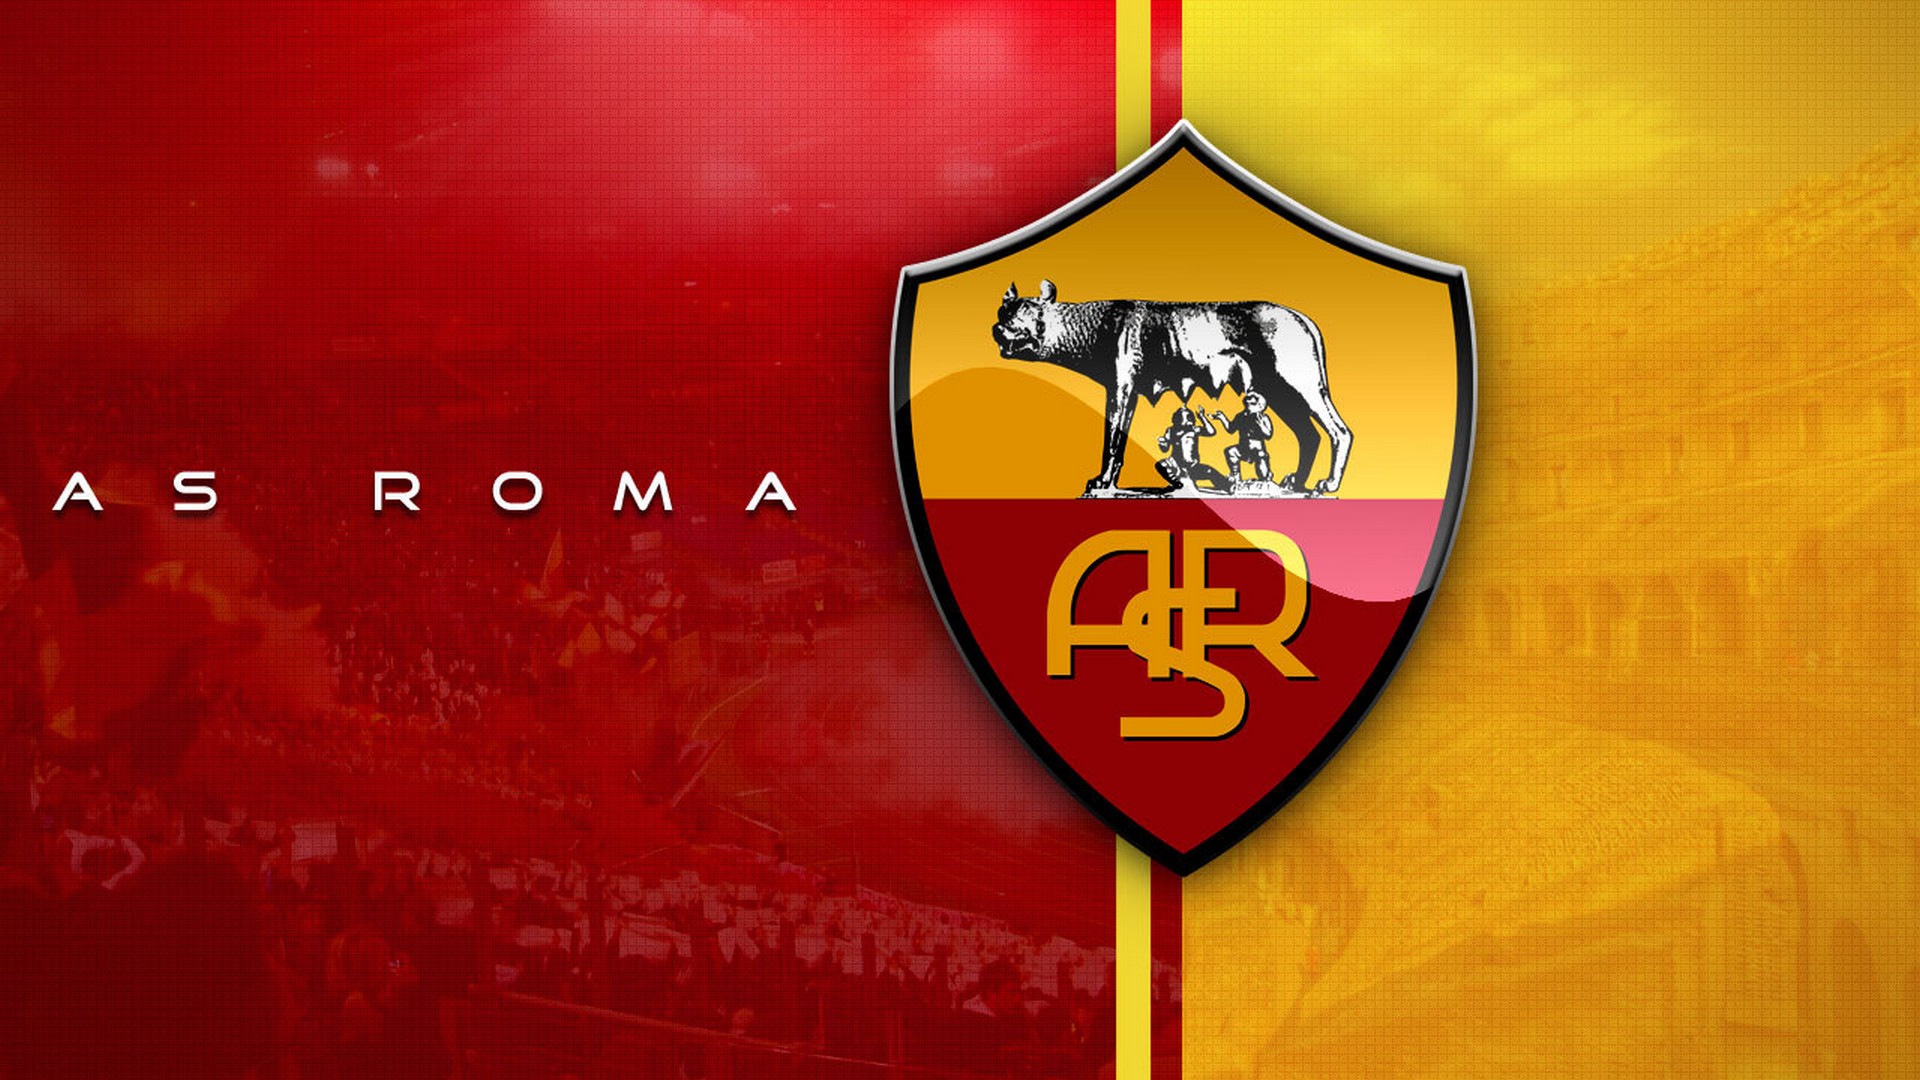 Wallpapers AS Roma With high-resolution 1920X1080 pixel. You can use this wallpaper for your Desktop Computers, Mac Screensavers, Windows Backgrounds, iPhone Wallpapers, Tablet or Android Lock screen and another Mobile device